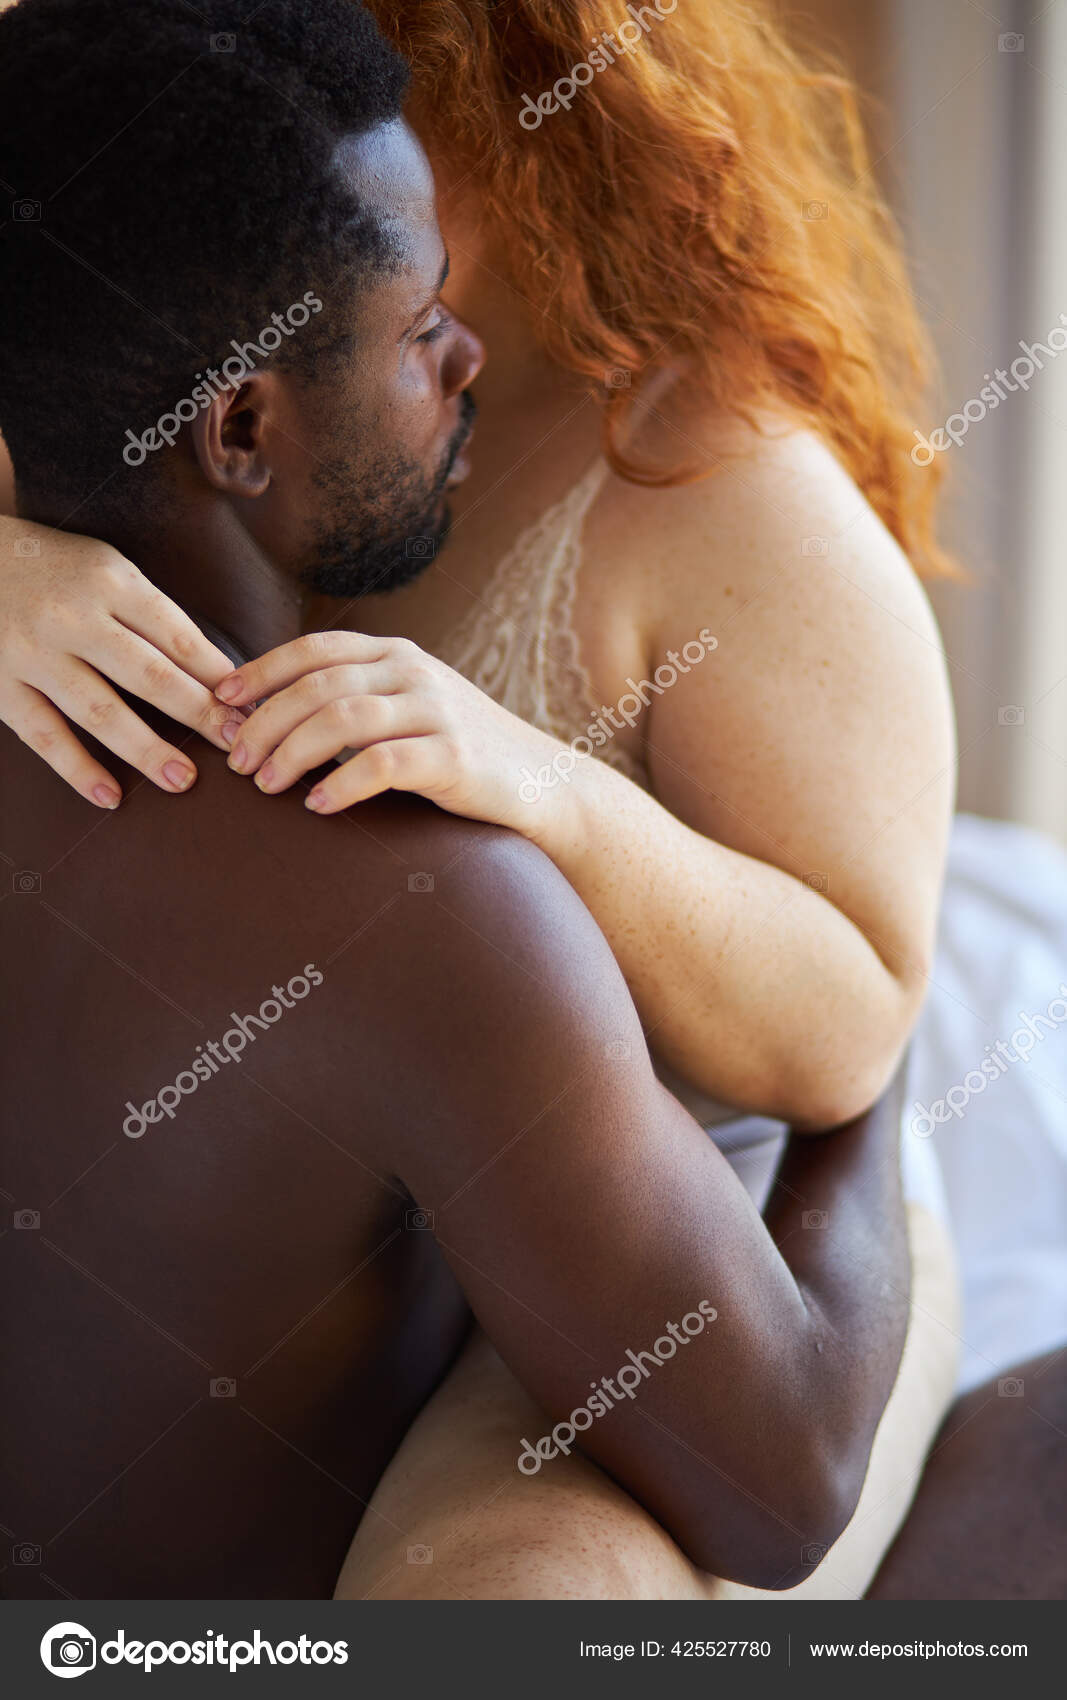 interracial wife redhead lover pictures